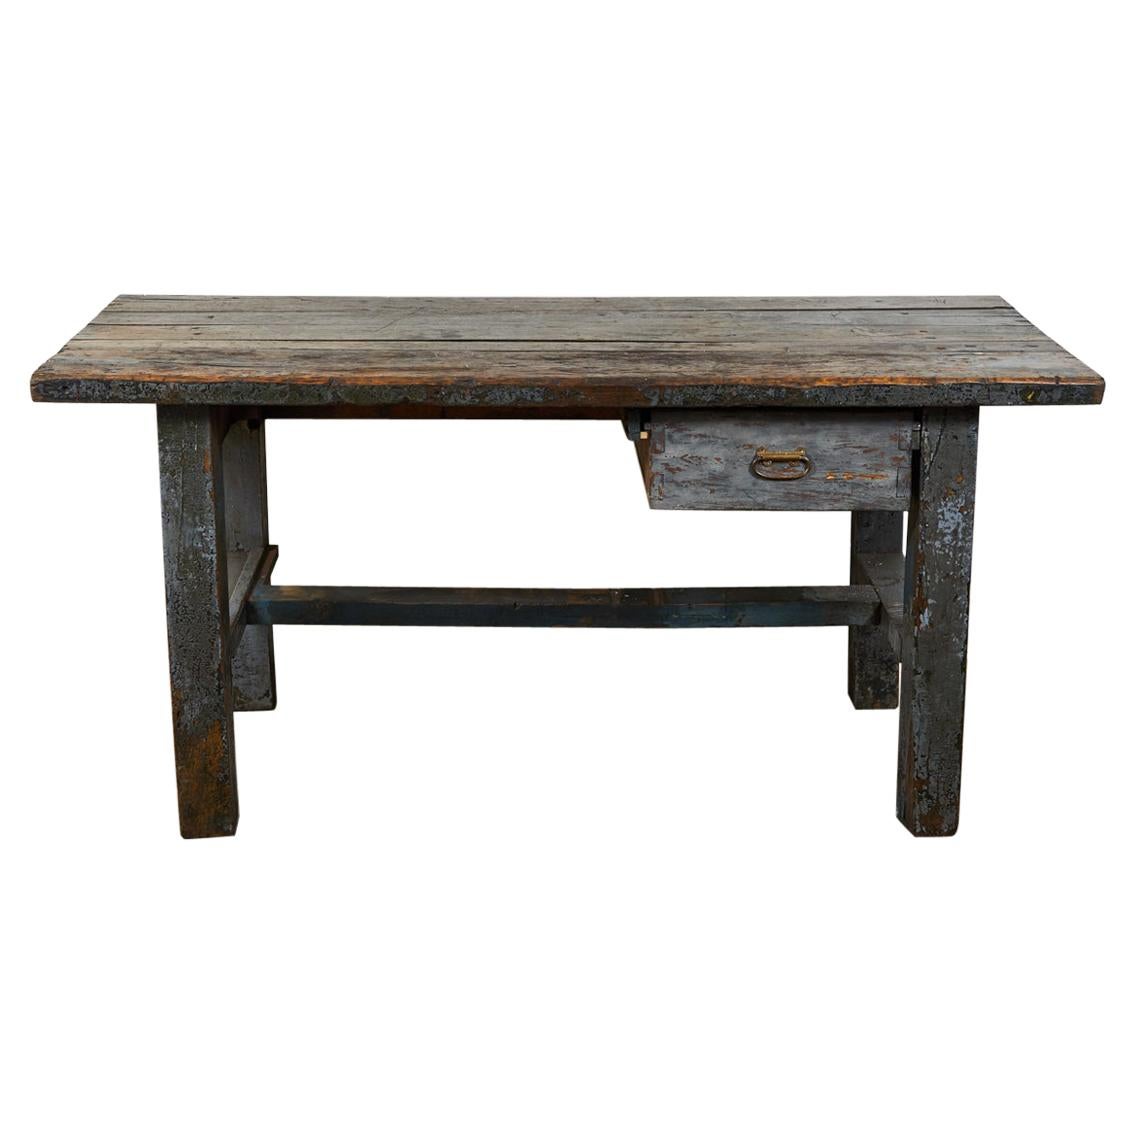 19th Century English Wood Plank Top Work Table